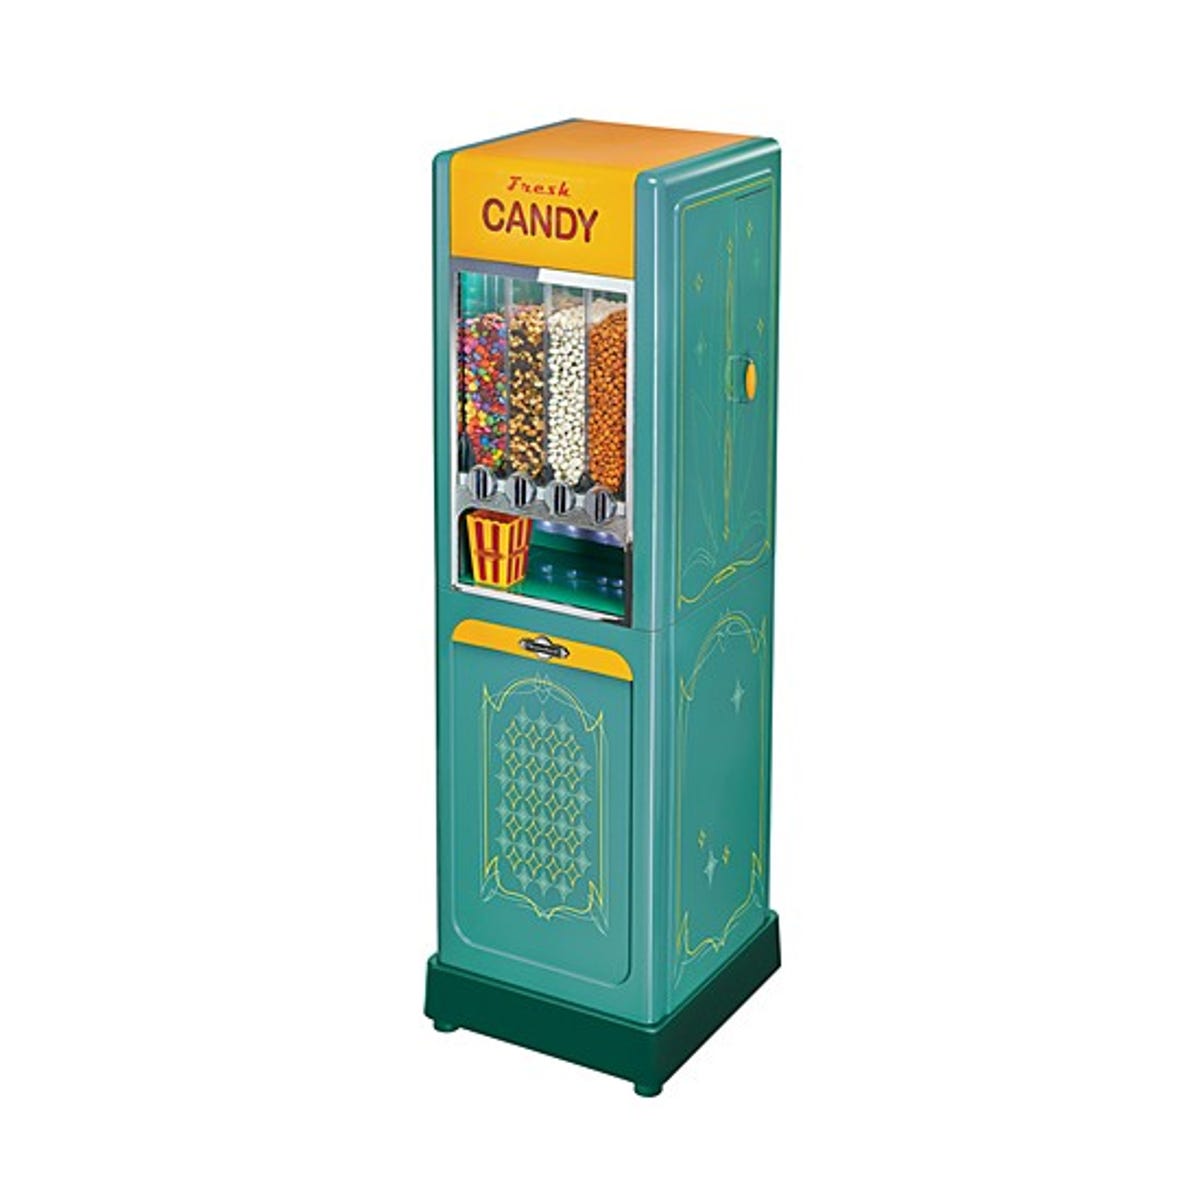 Every day is Halloween with the Sensio Throwback Candy Dispenser.